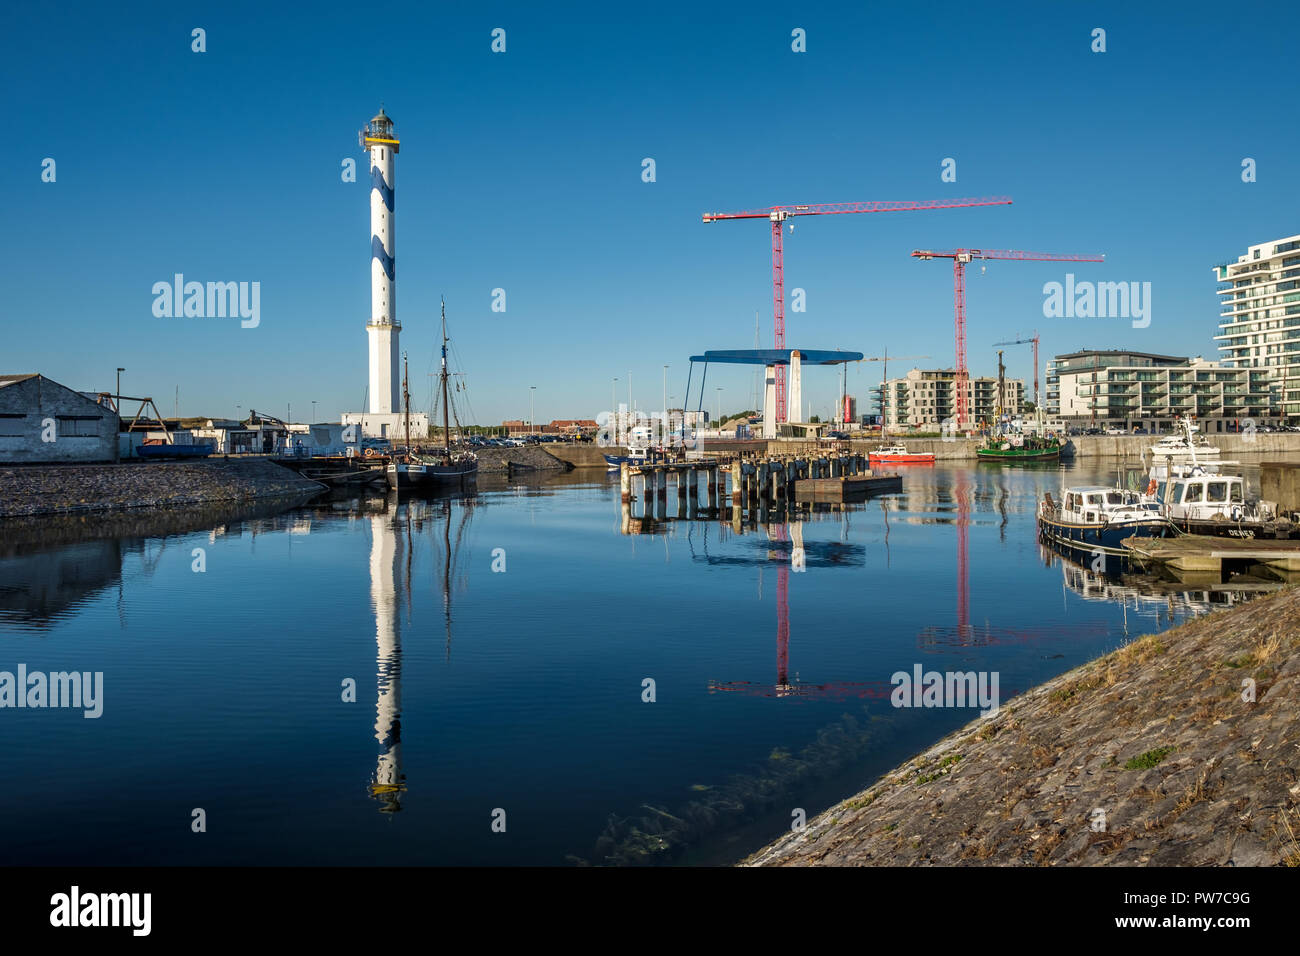 Old lighthouse of Ostend known as ‘Lange Nelle’, reflected in a commercial dock, Thursday 2 August 2018, Oostende, Belgium Stock Photo